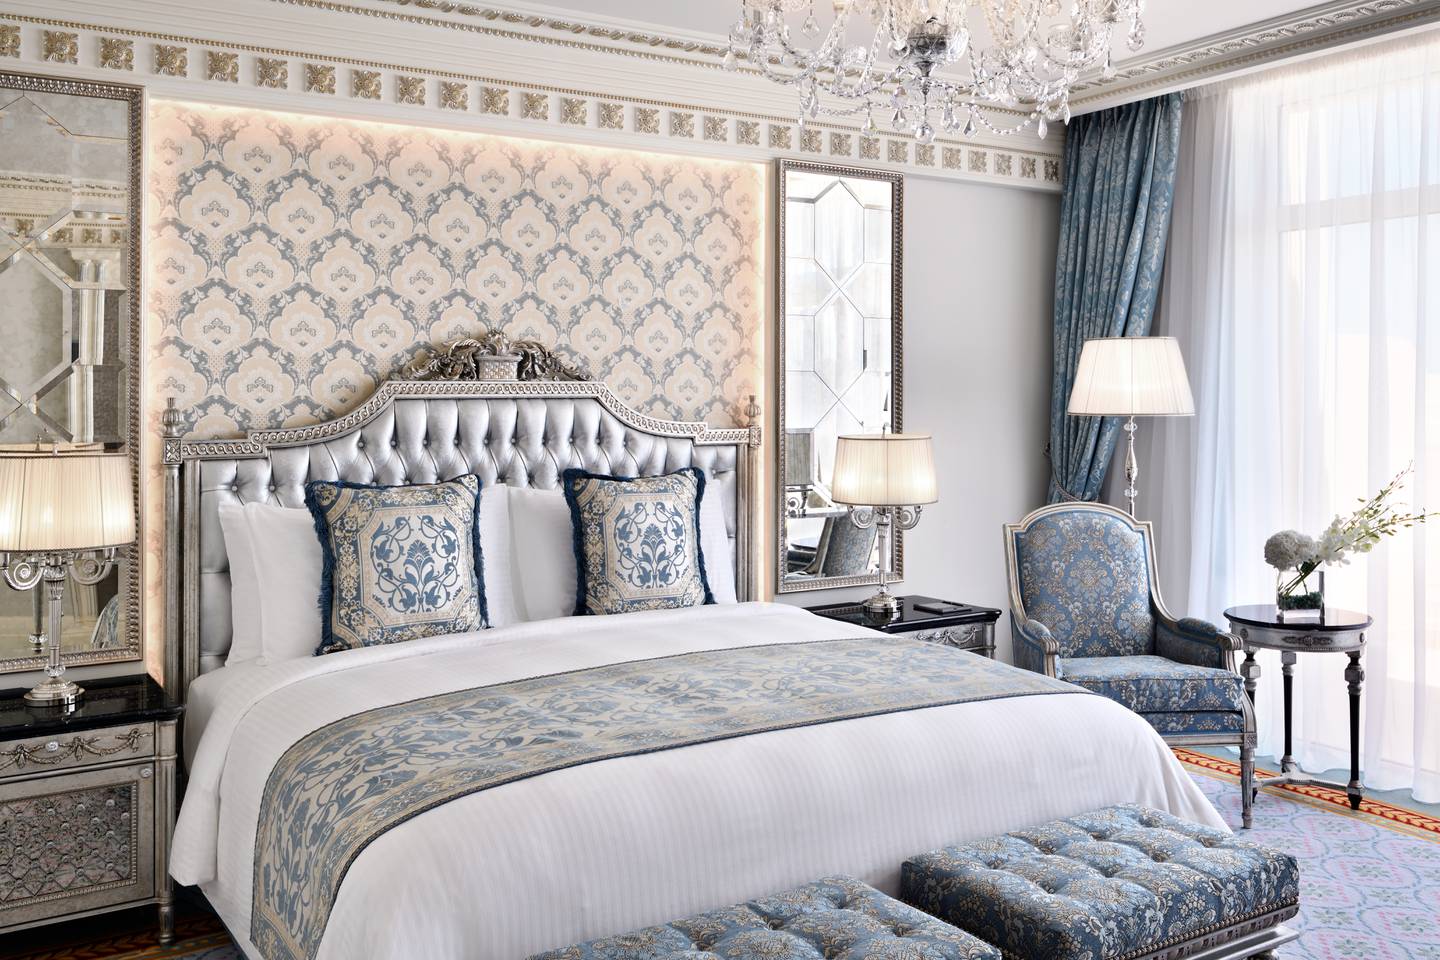 Rooms and suites at Raffles The Palm Dubai boast ornate decor, quilted furniture and sparkling chandeliers. Photo: Raffles Hotels and Resorts